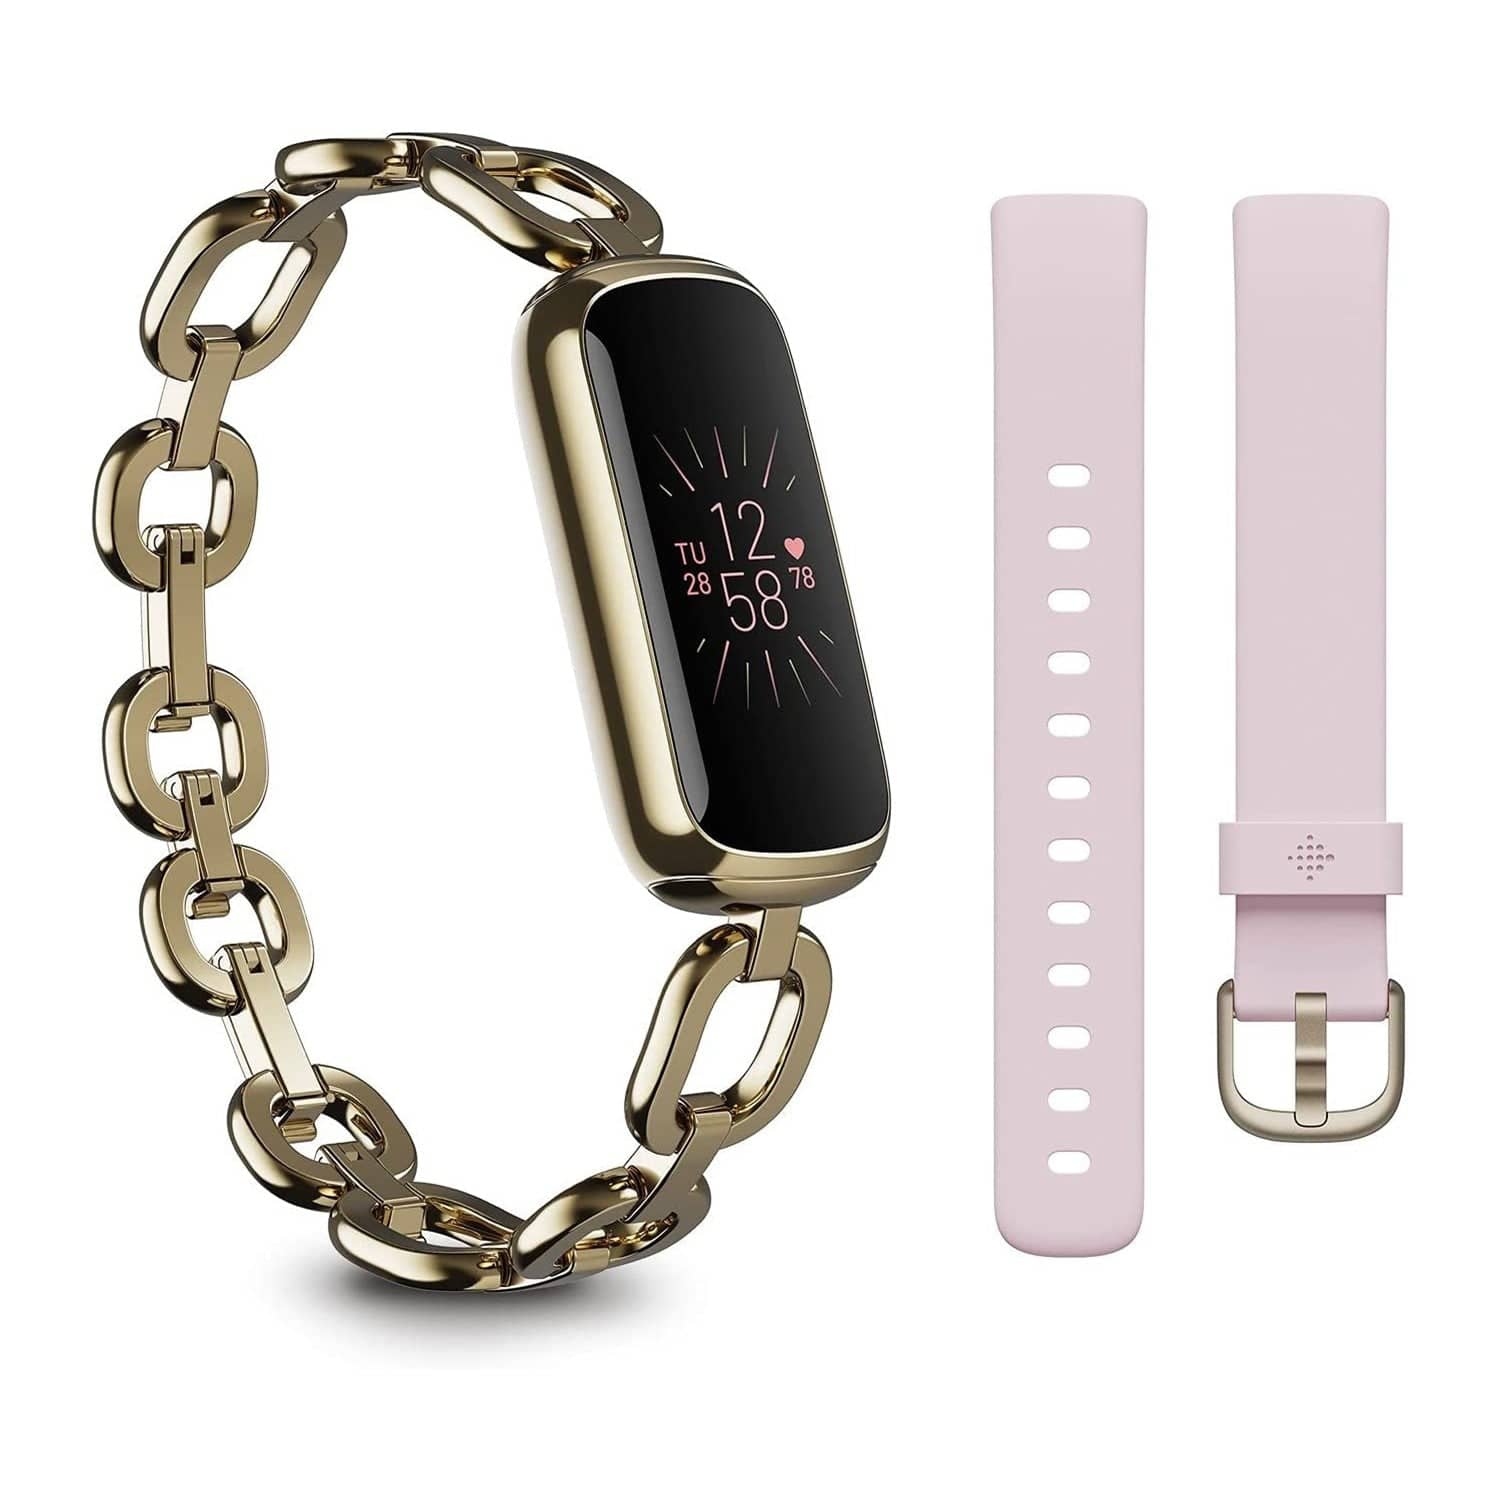 Fitbit Luxe Fitness Tracker